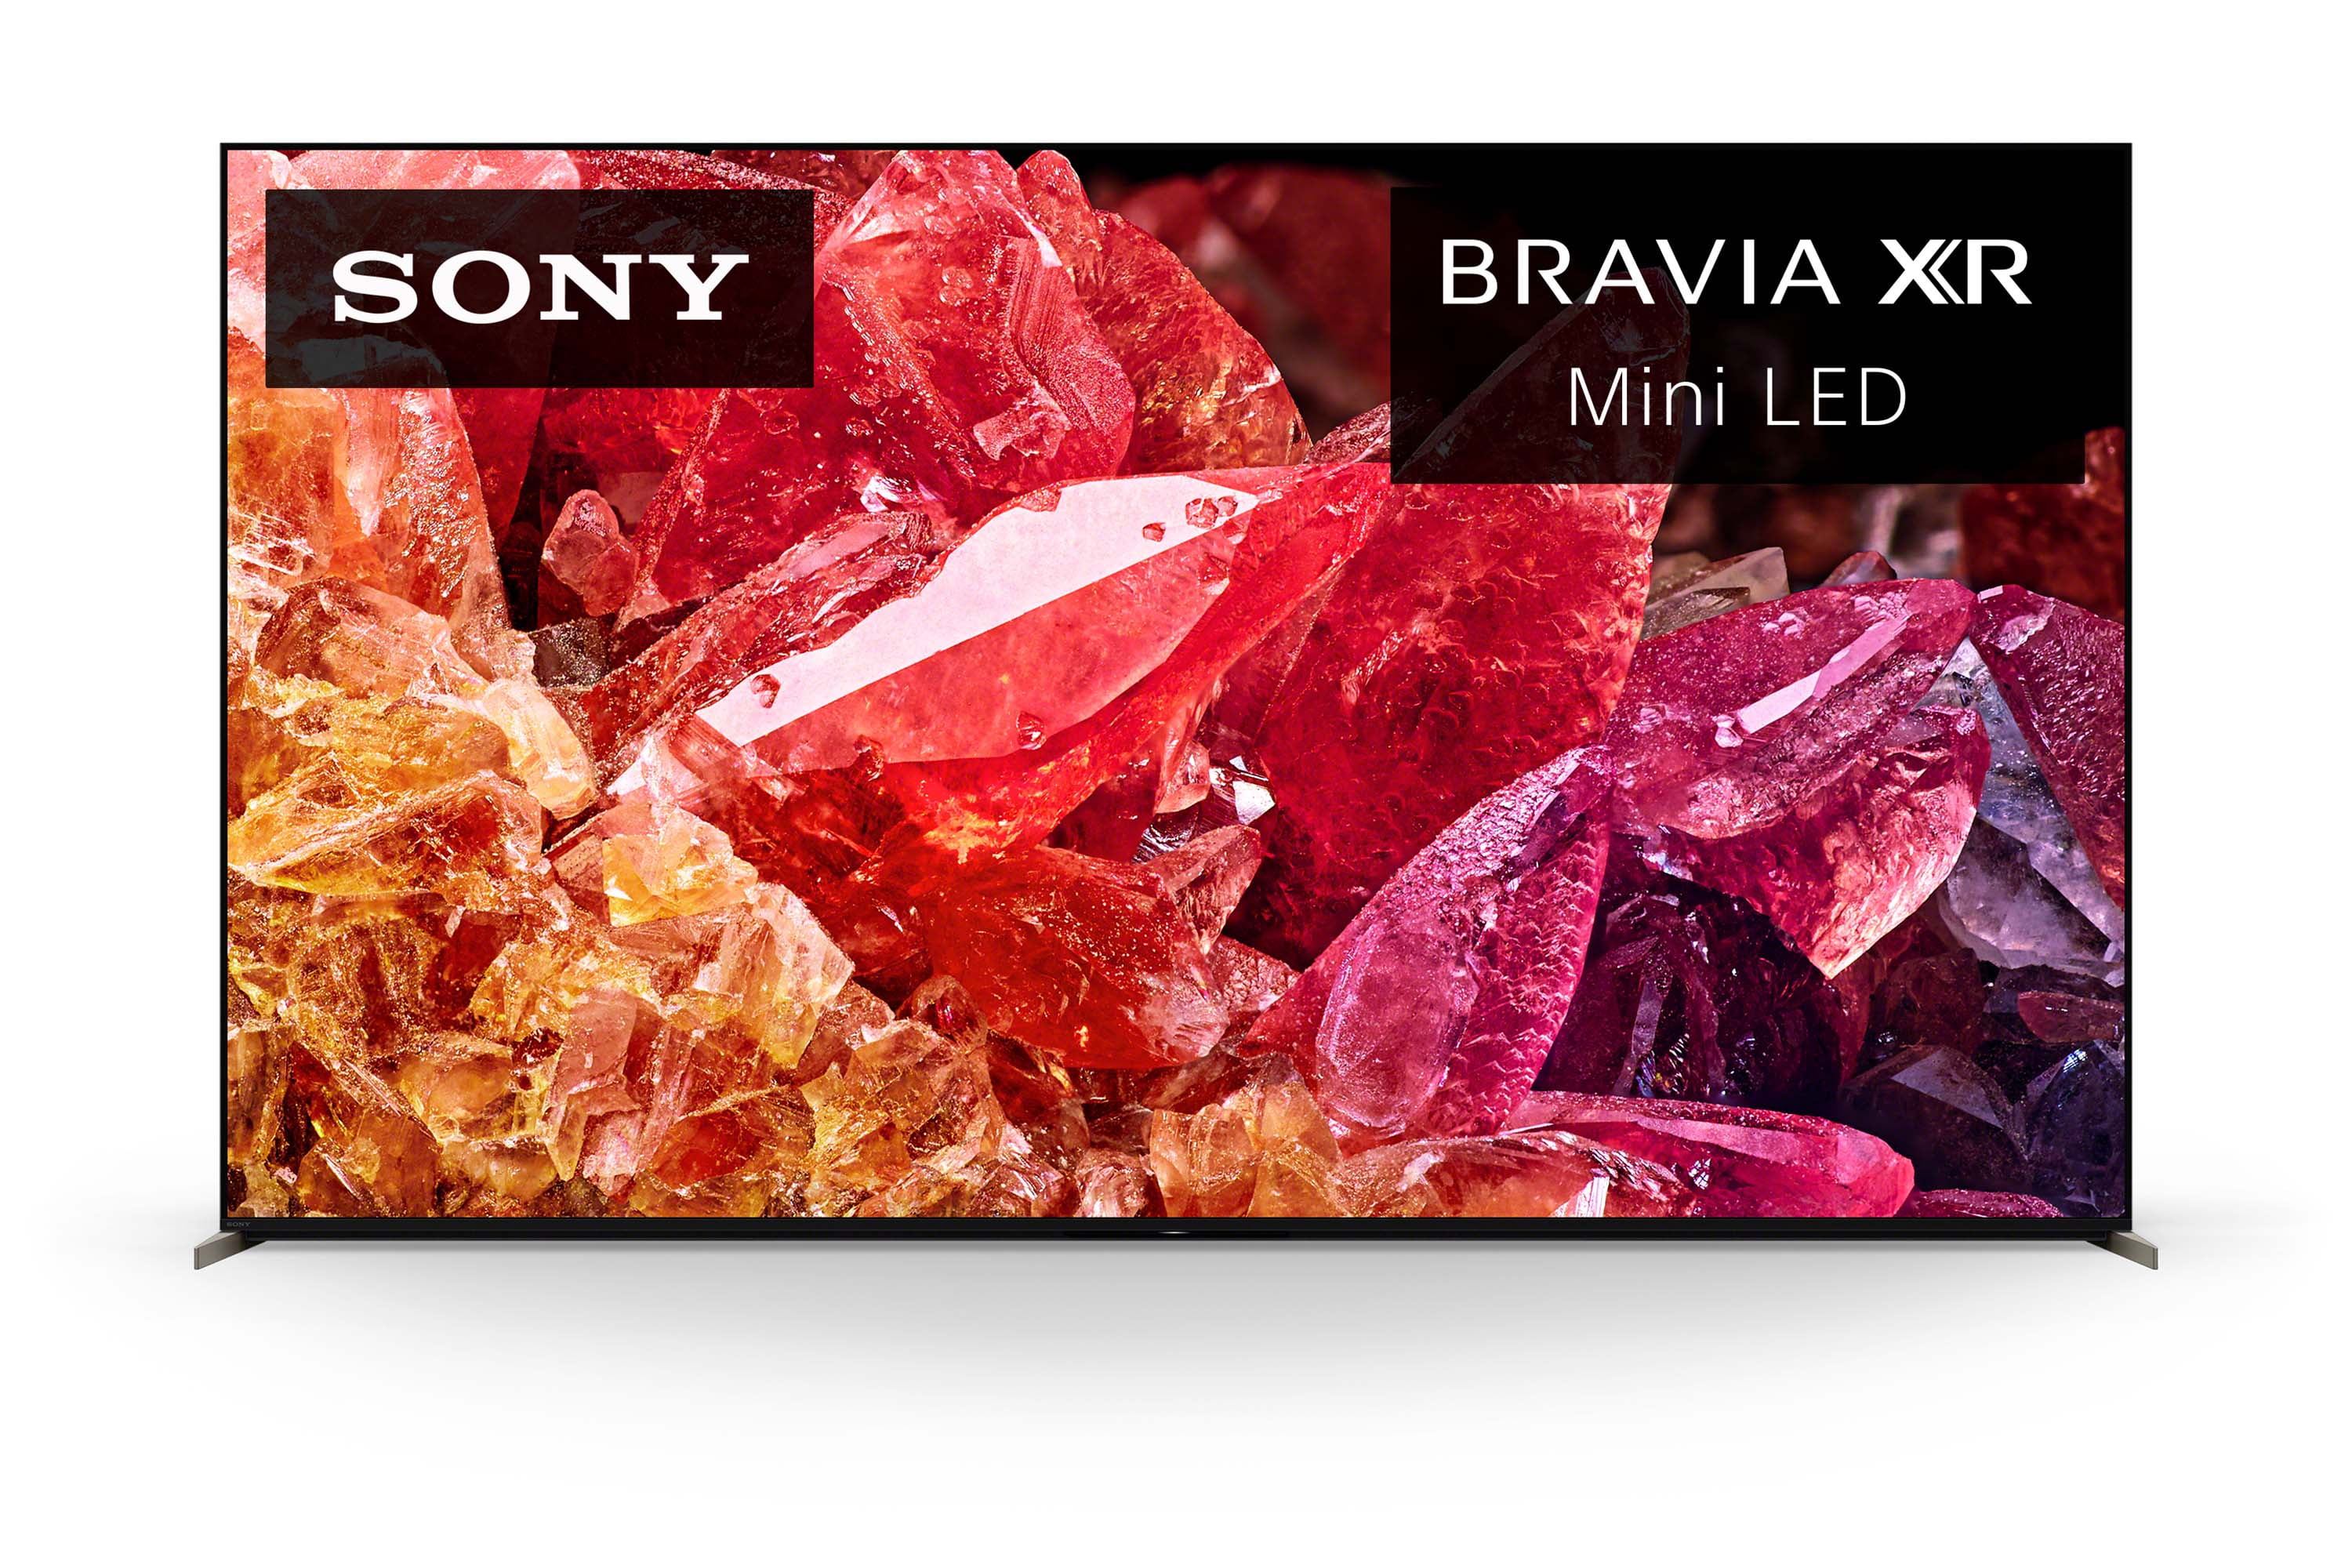 Sony 48” Class Model HDR Google with 4K XR48A90K- A90K 2022 TV smart OLED TV